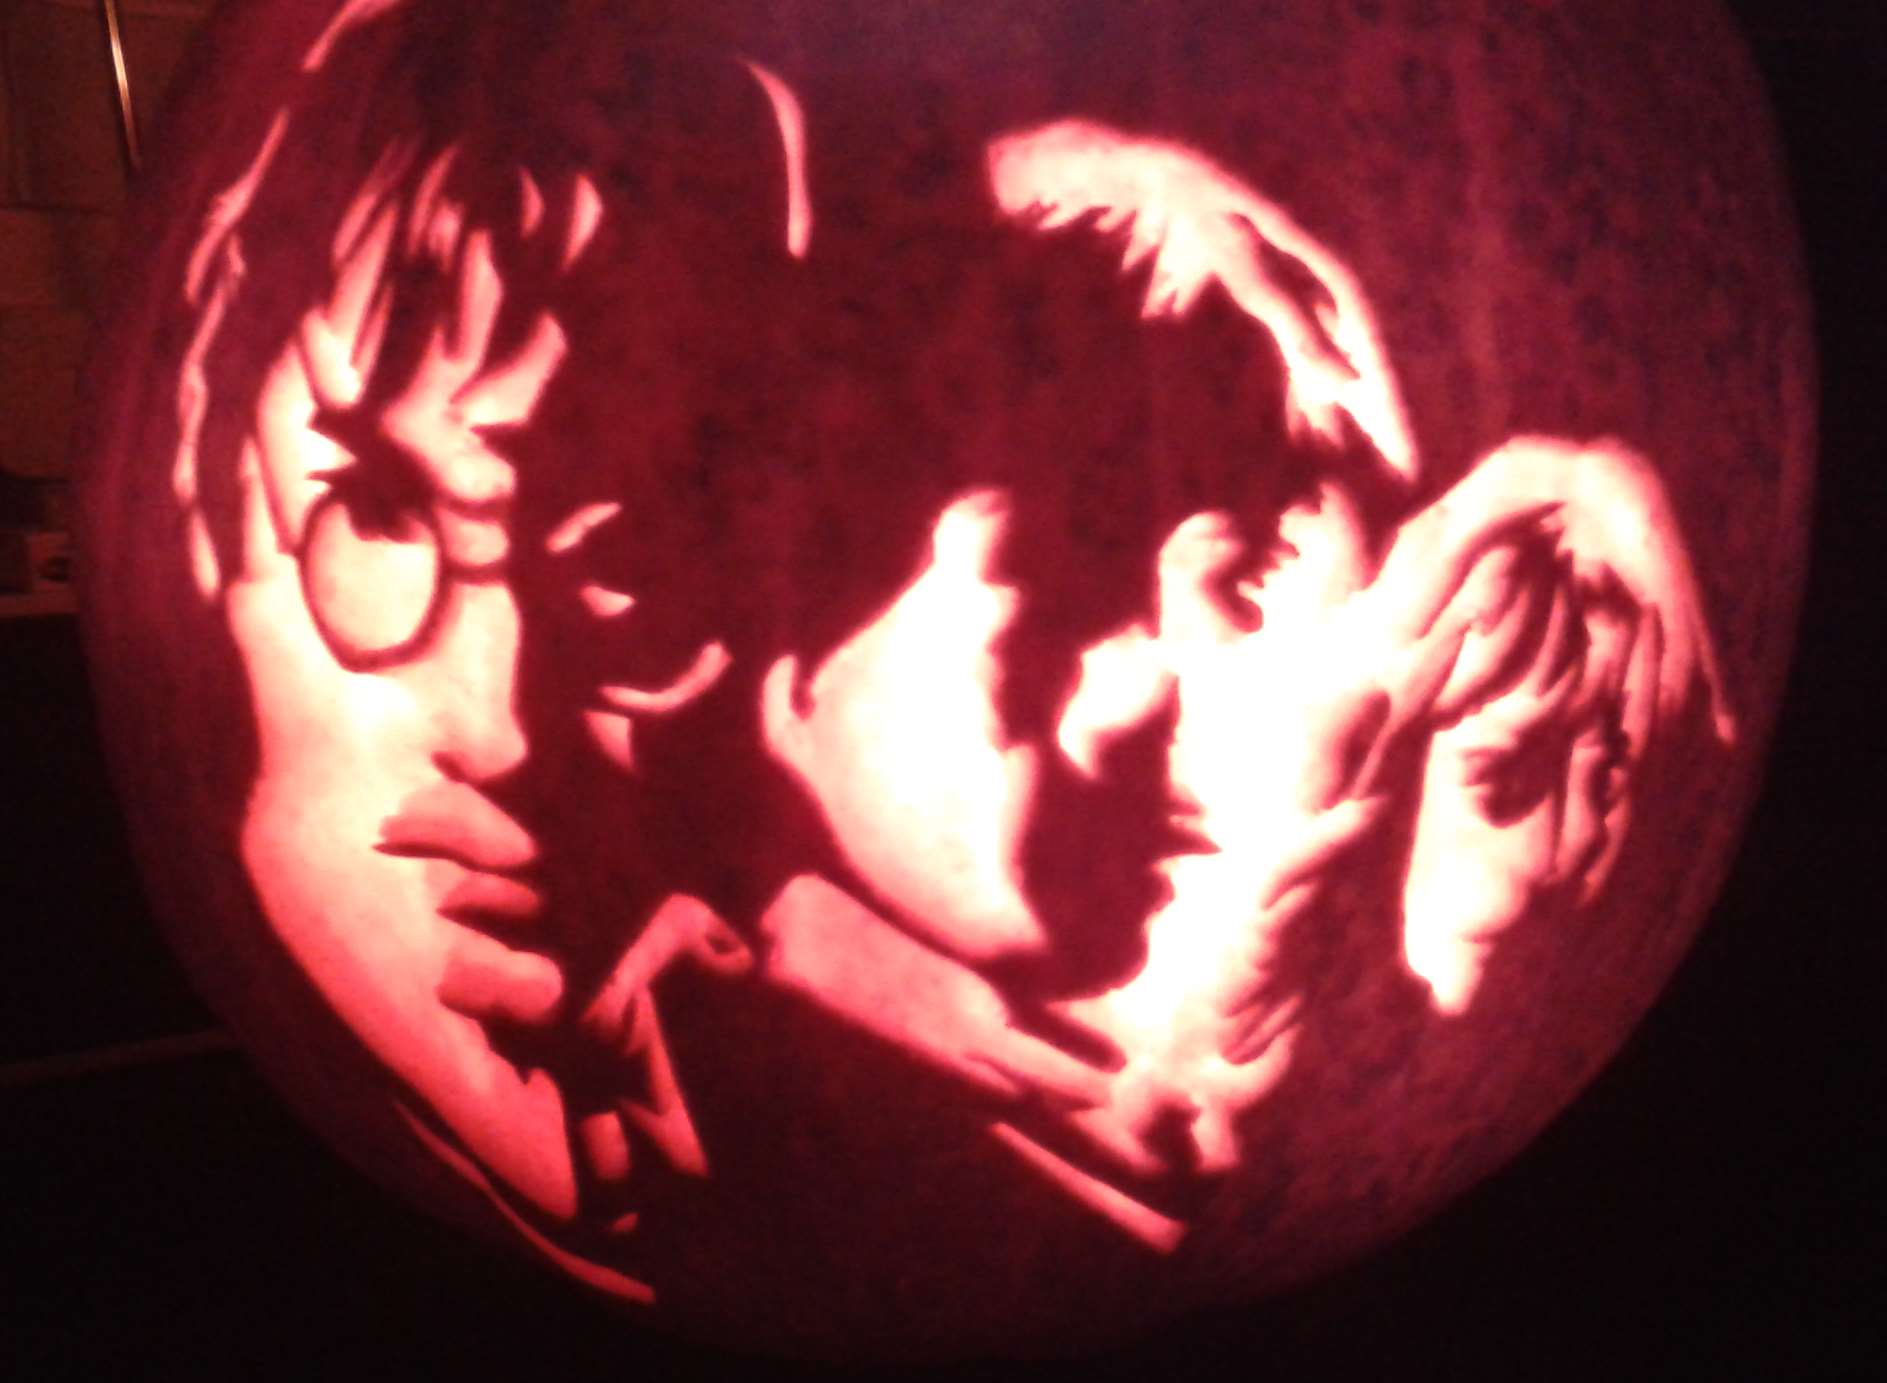 What could be more spooky than Harry Potter? Another one from Jason Burns